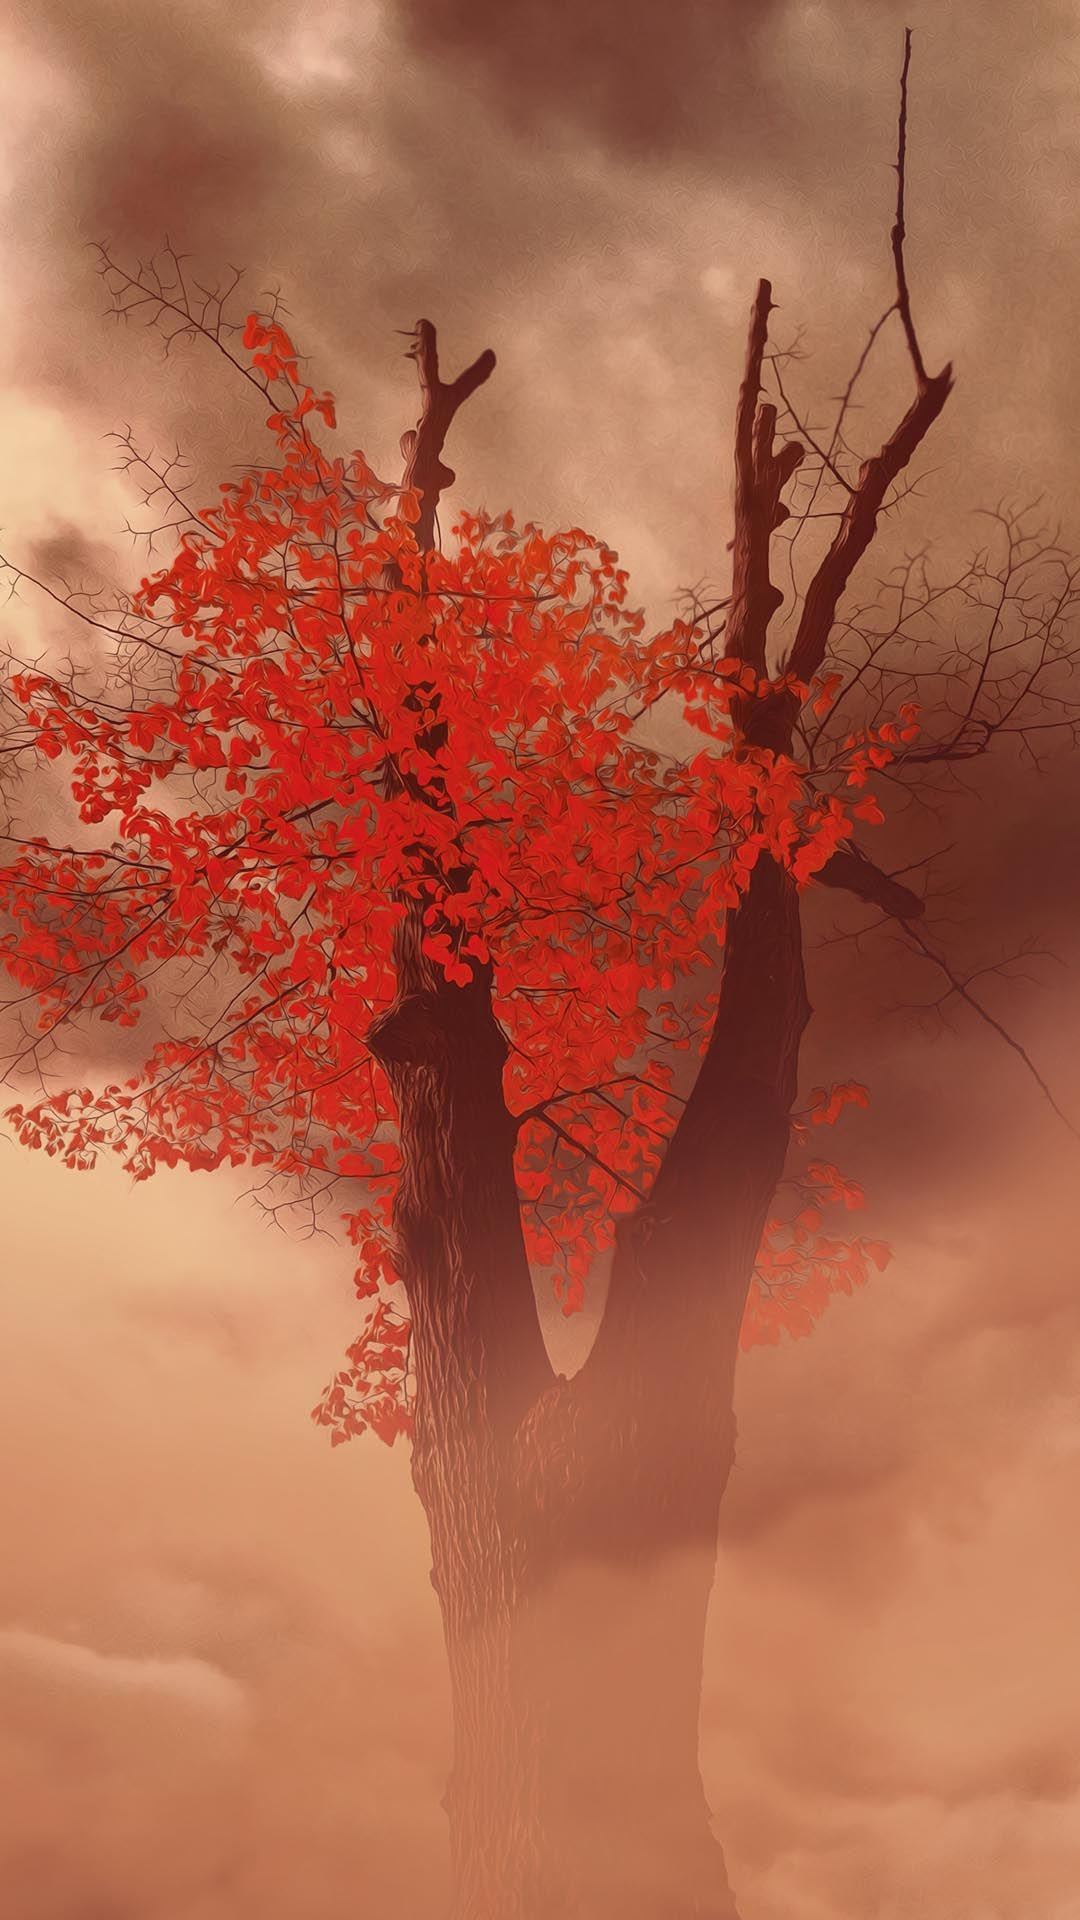 1080x1920 Last Red Leaves On Branches Wallpaper | Art photography, Fantasy pictures, Art inspirati